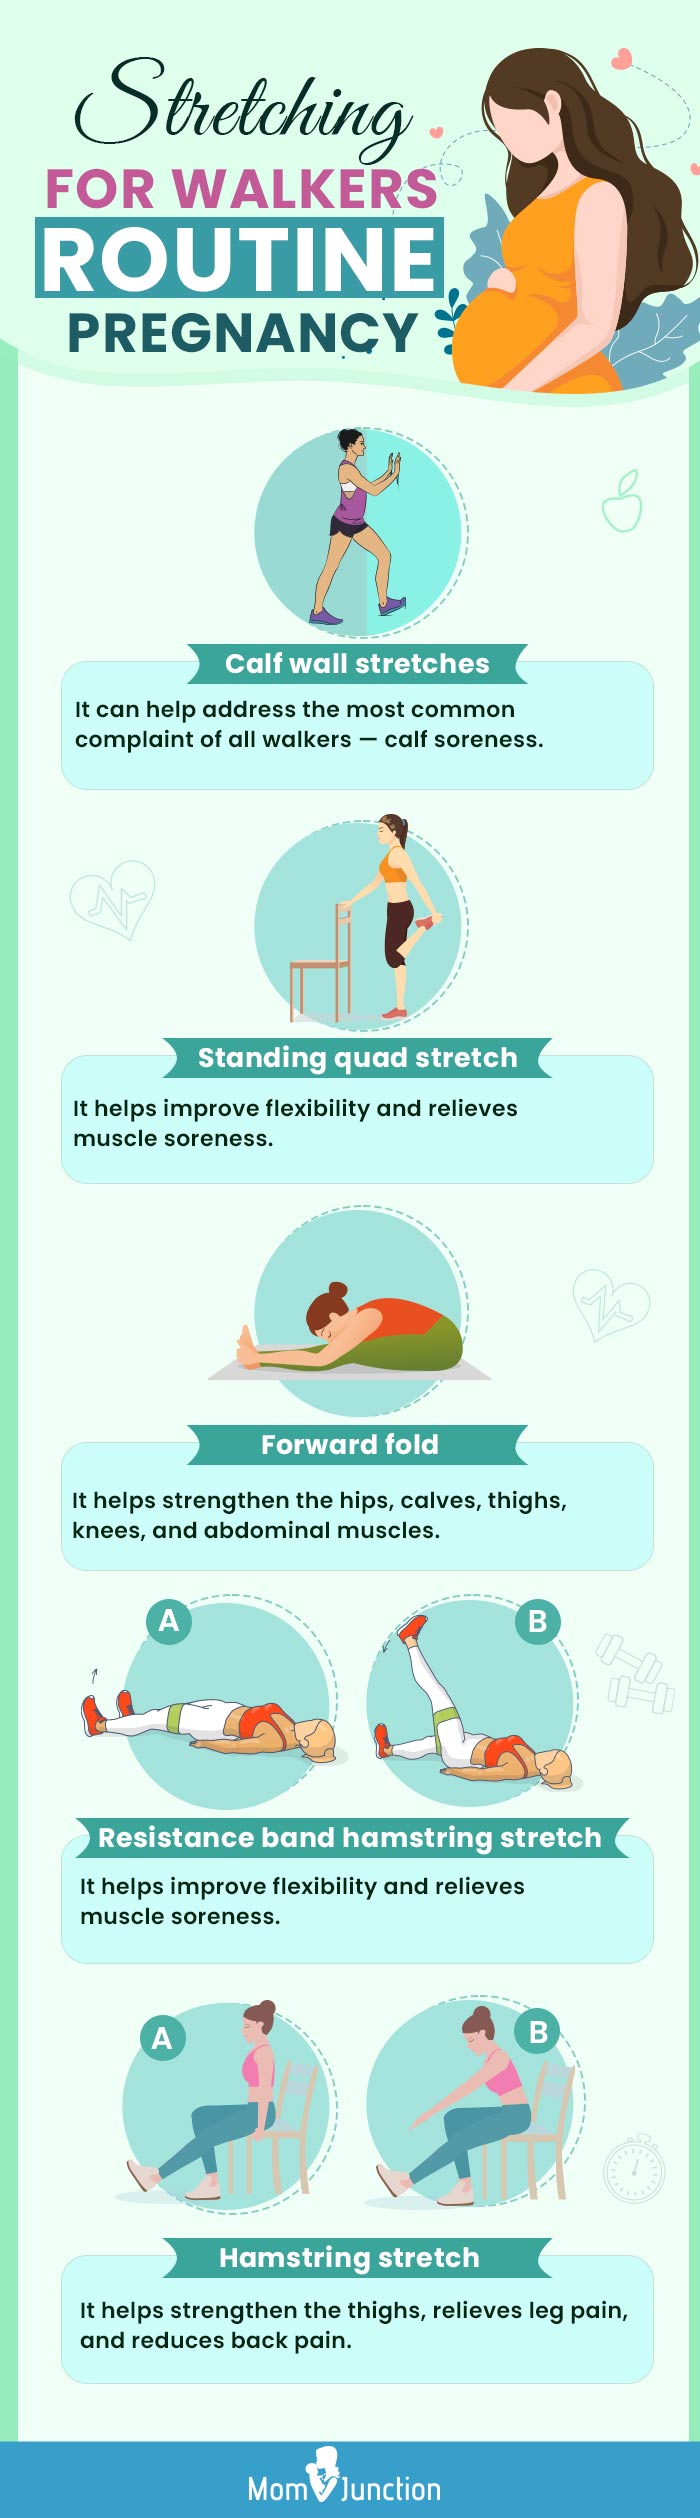 stretching routine for walkers during pregnancy [infographic]